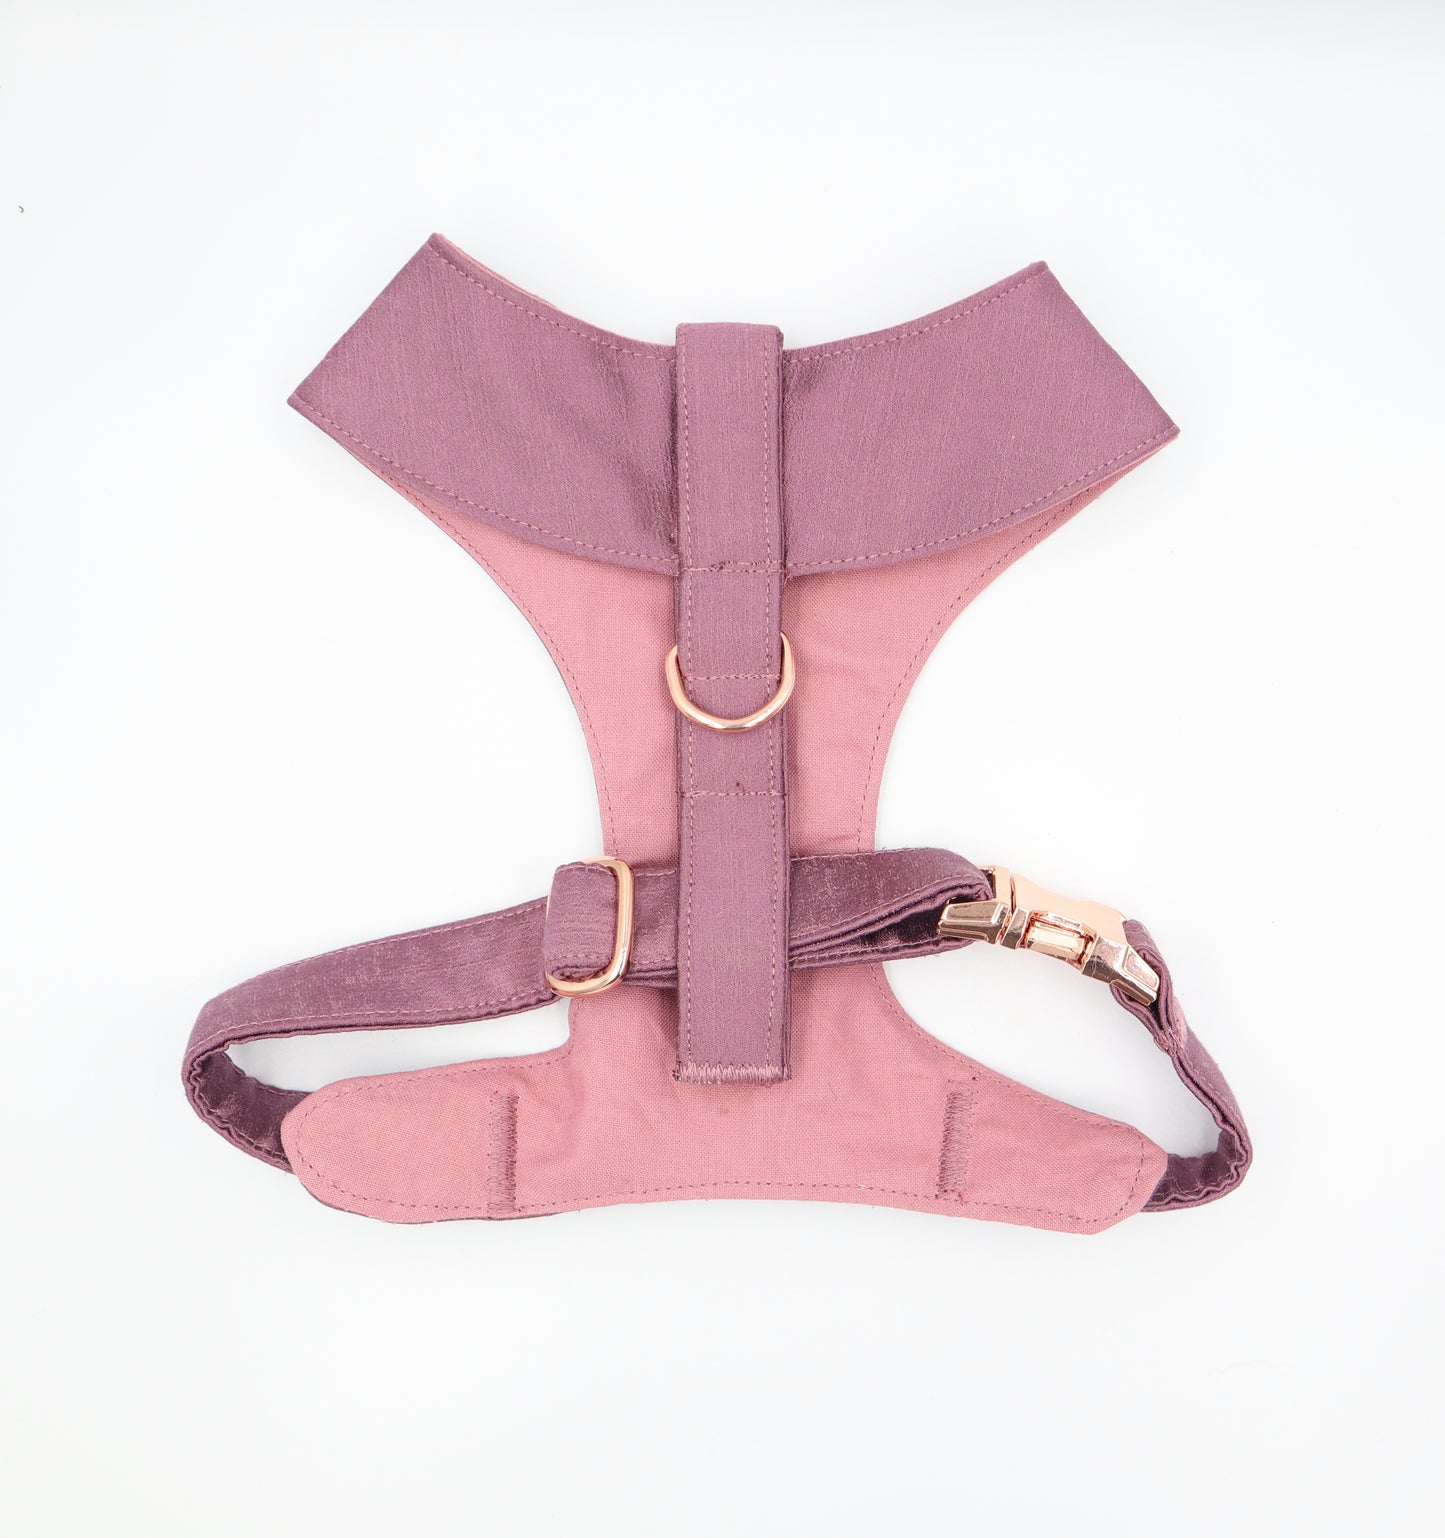 Tuxedo Wedding Dog Harness in Mauve Shot Silk Satin with Matching Bow CHOICE of COLOURS